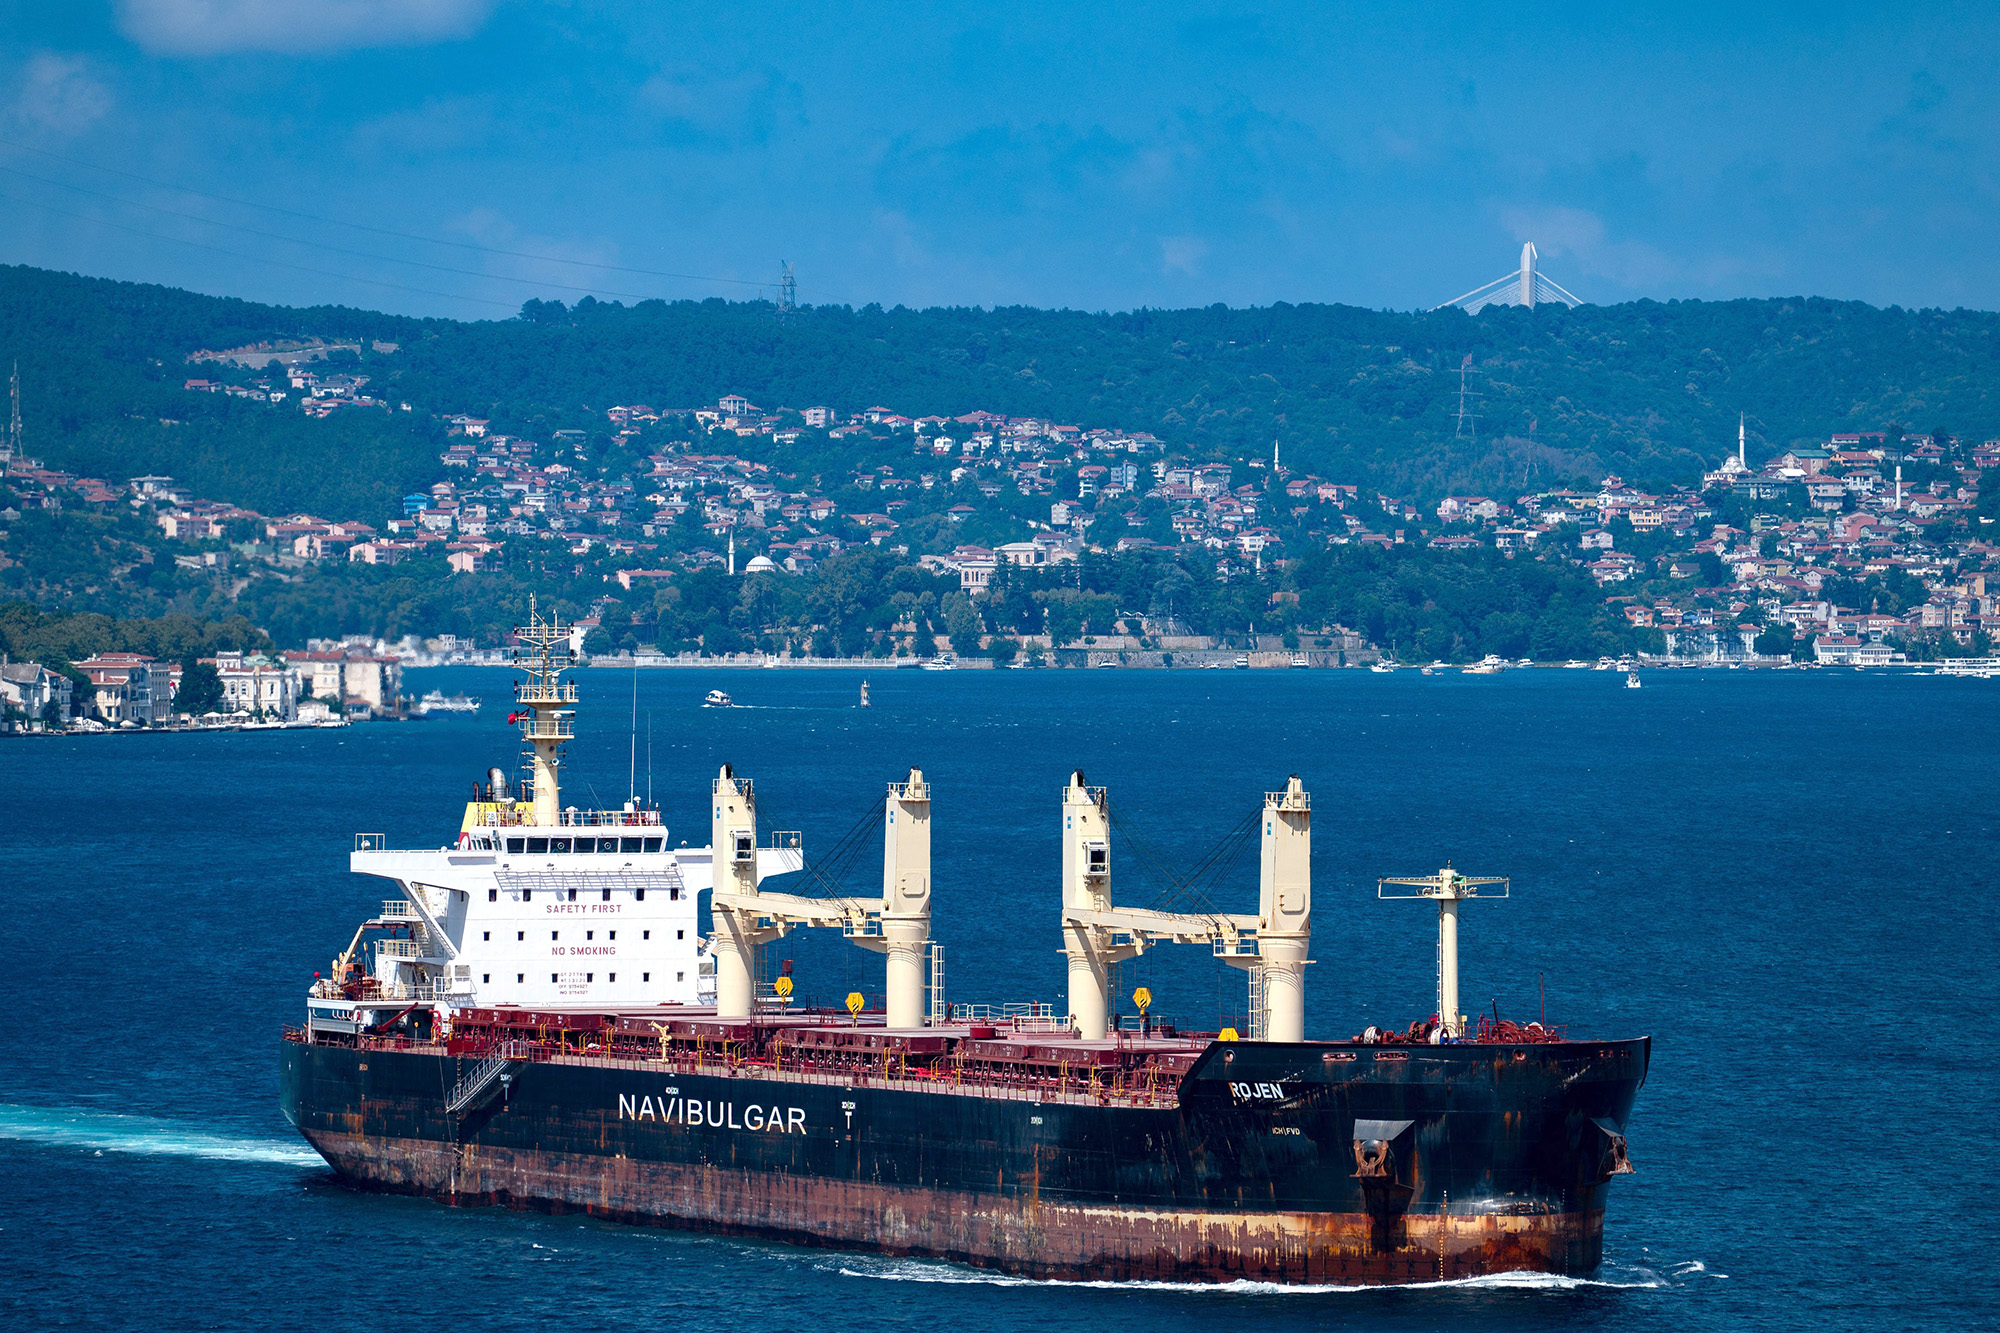 Malta-flagged bulk carrier M/V Rojen carrying tons of grain from Ukraine sails along the Bosphorus Strait in Istanbul on August 7, after being officially inspected as part of the Black Sea grain deal.